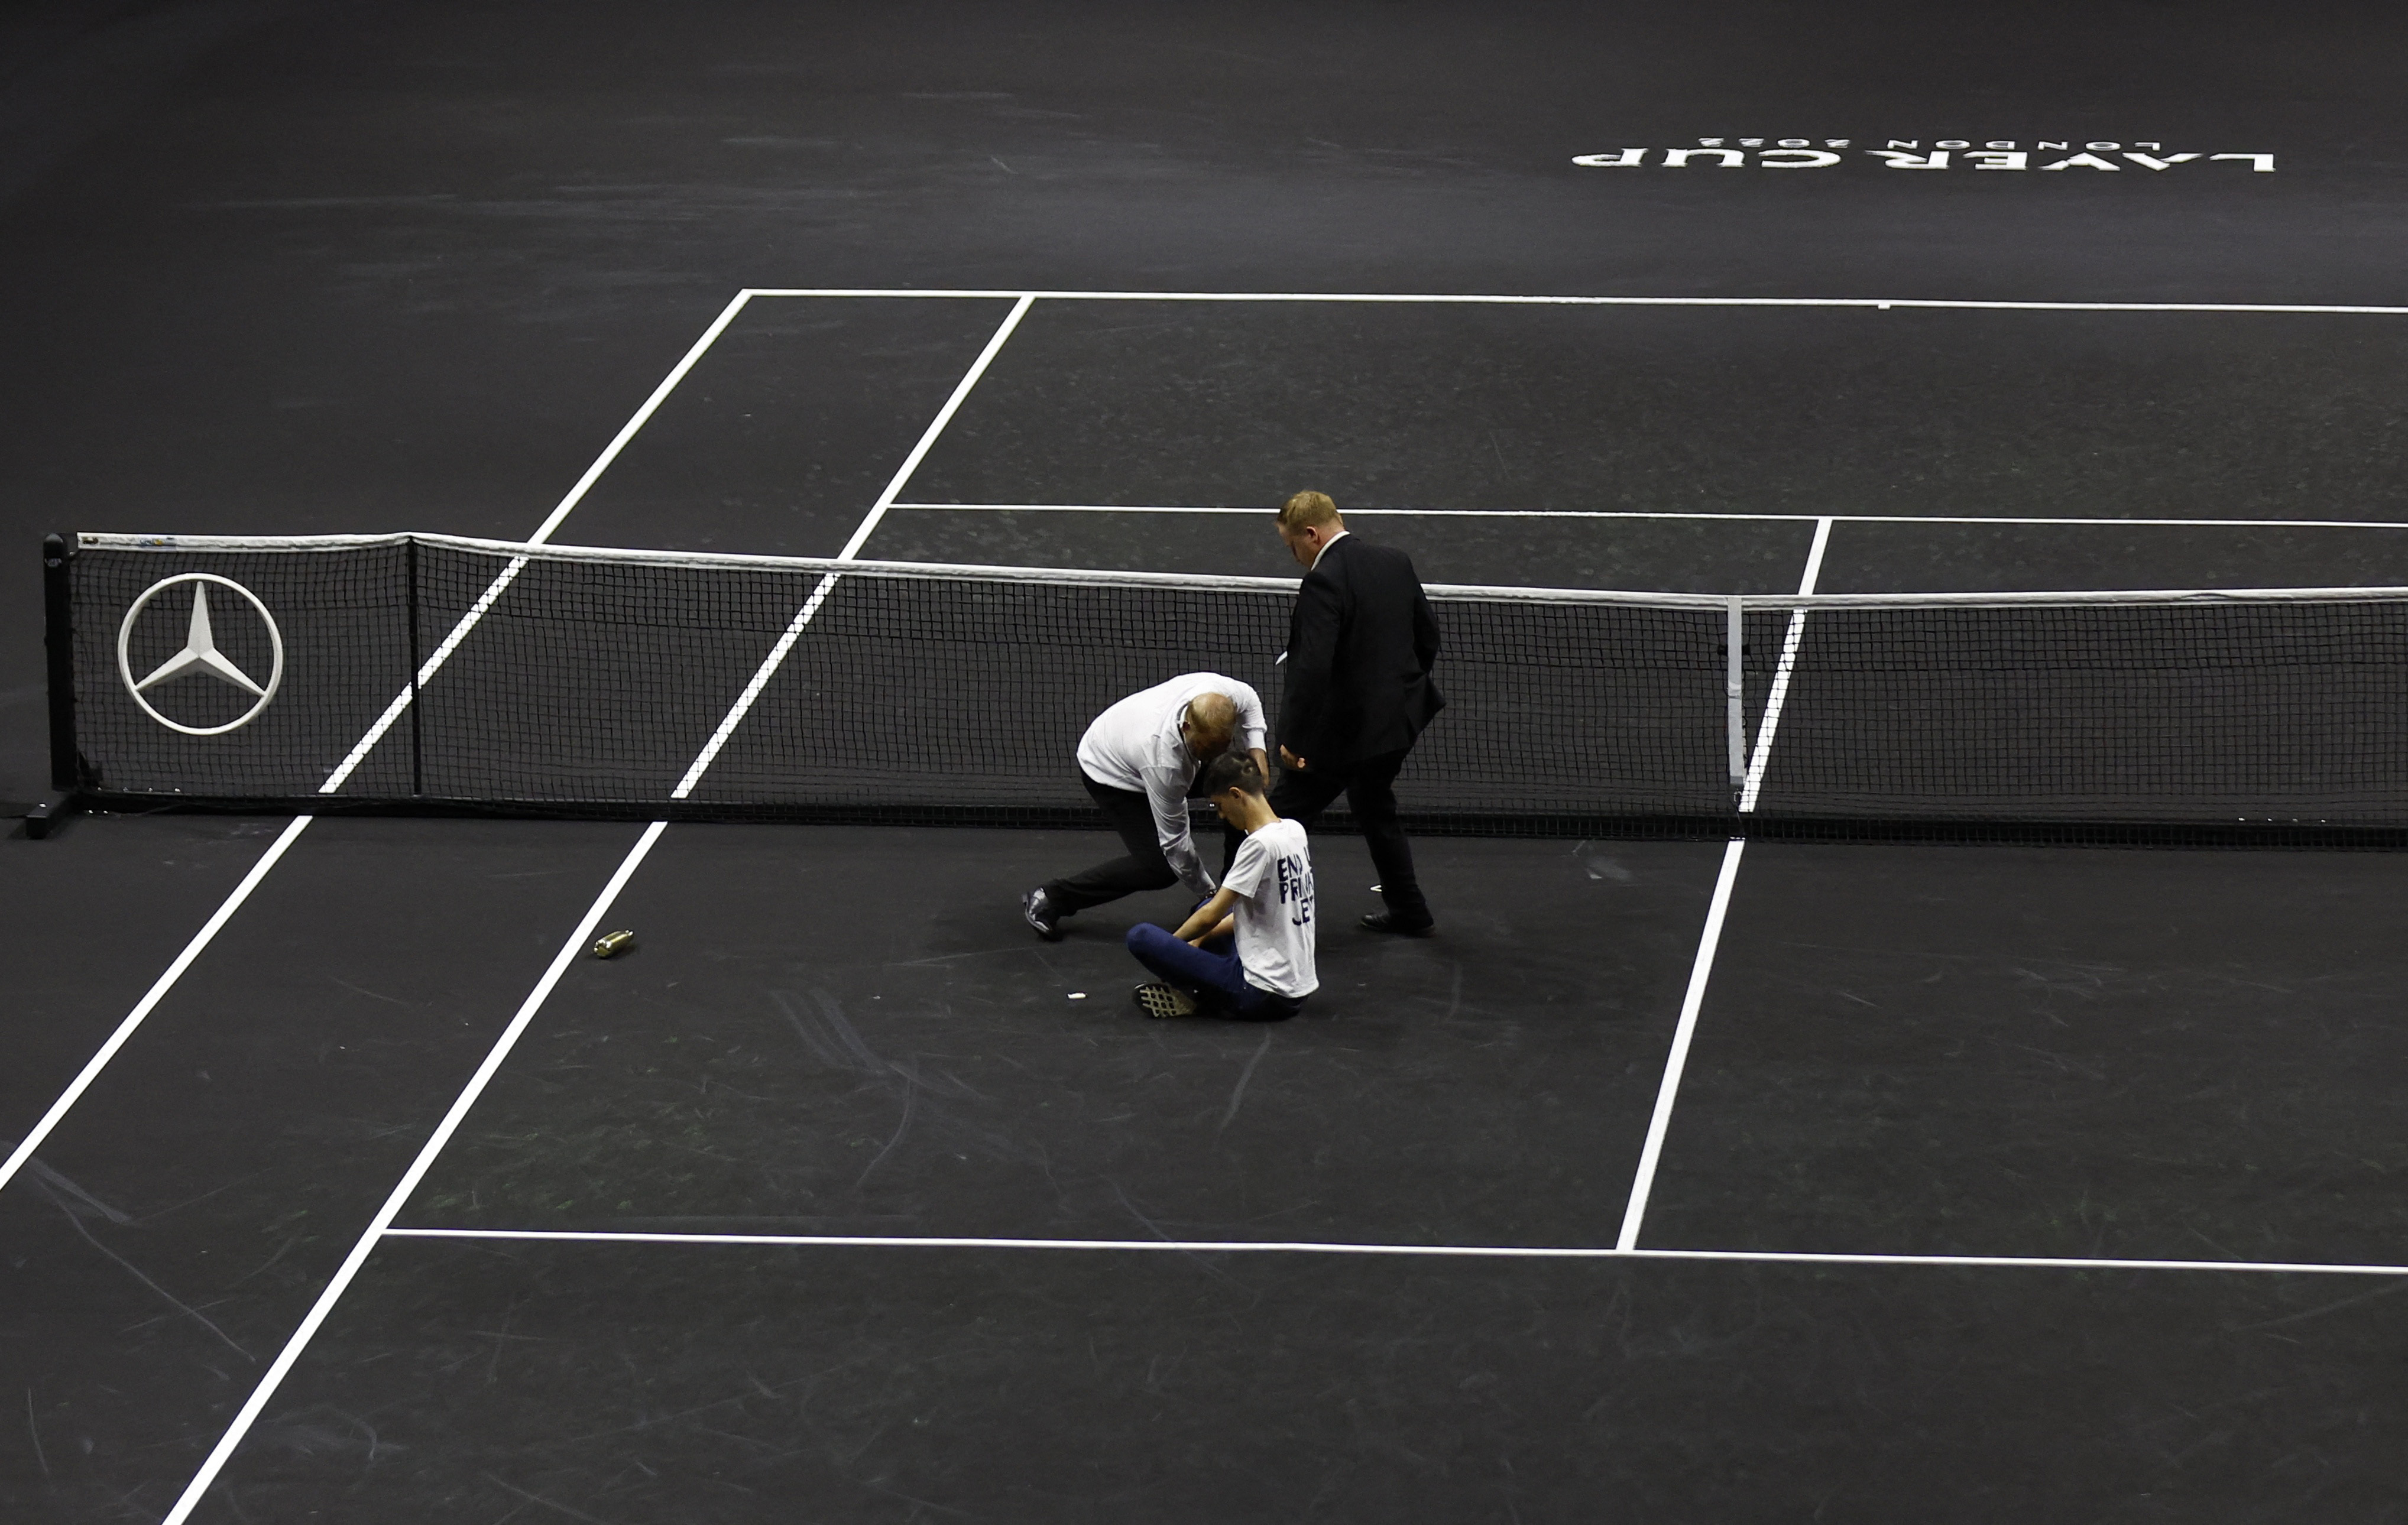 Tennis - Laver Cup - 02 Arena, London, Britain - September 23, 2022   A protester is removed from the court during the match between Team Europe's Stefanos Tsitsipas and Team World's Diego Schwartzman Action Images via Reuters/Andrew Boyers